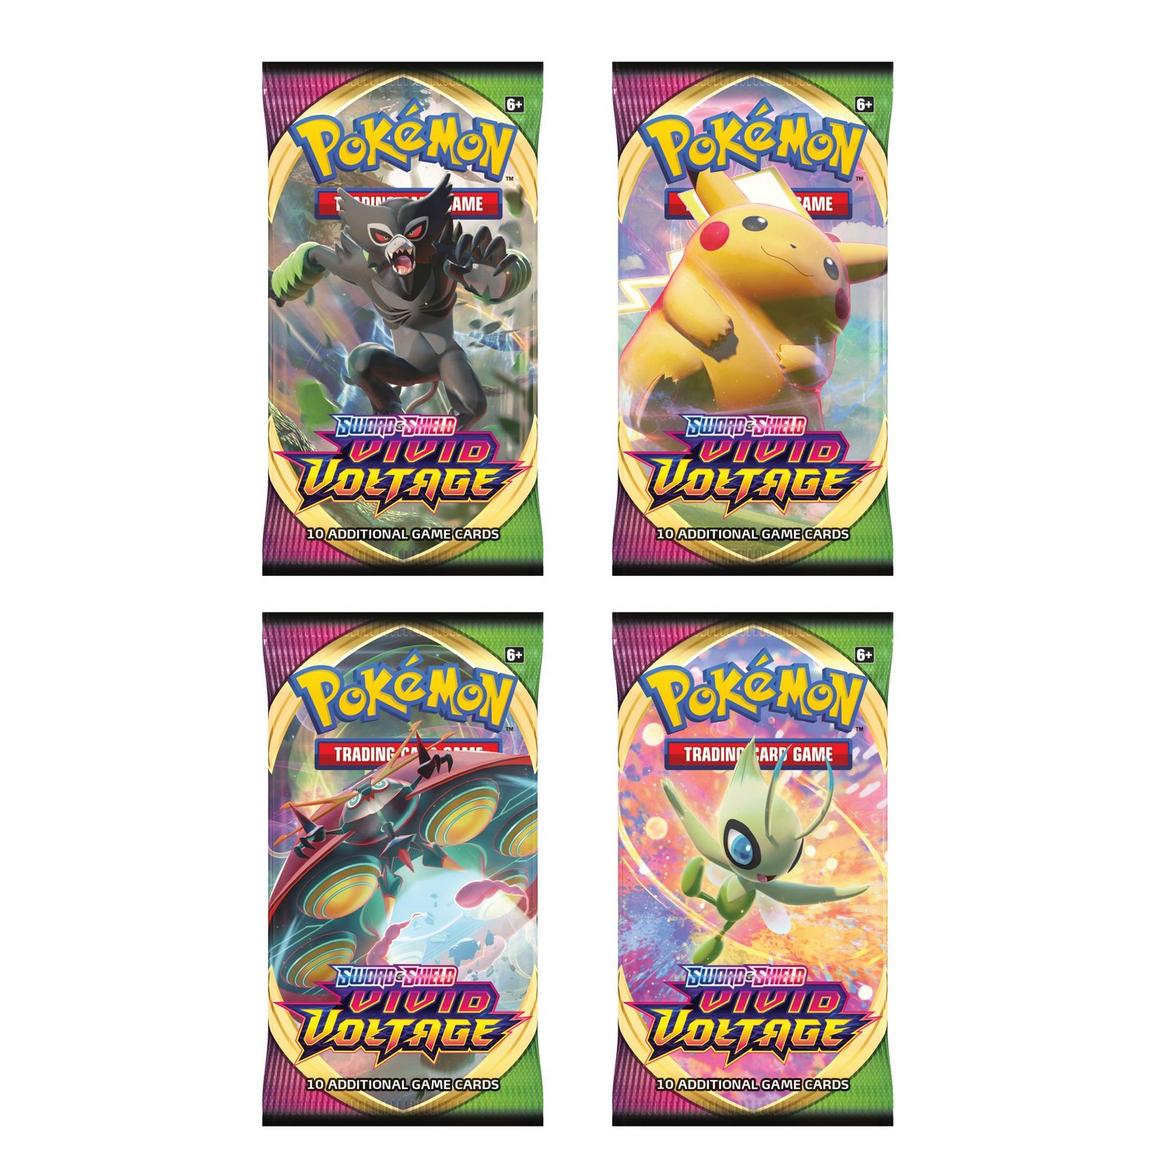 Pokemon: Trading Card Game Sword and Shield Vivid Voltage Booster Pack